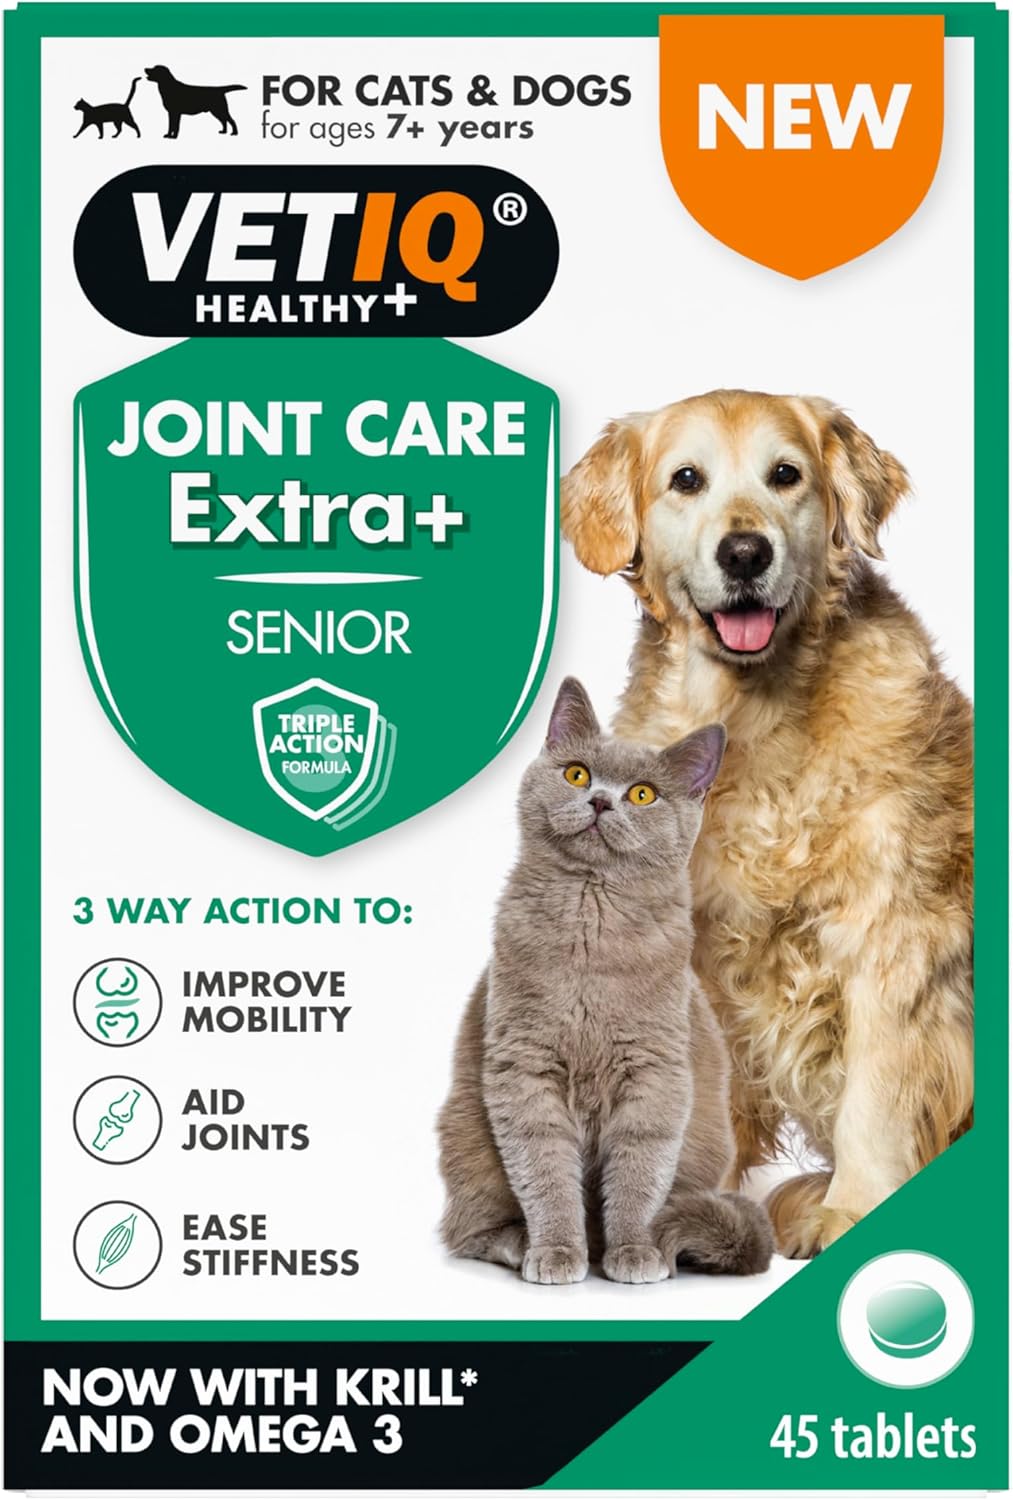 VETIQ Joint Care Extra + Senior For Cats & Dogs 7+ Years, Supplements to Help Improve Mobility, Aid Joints & Ease Stiffness, 45 Tablets?6655